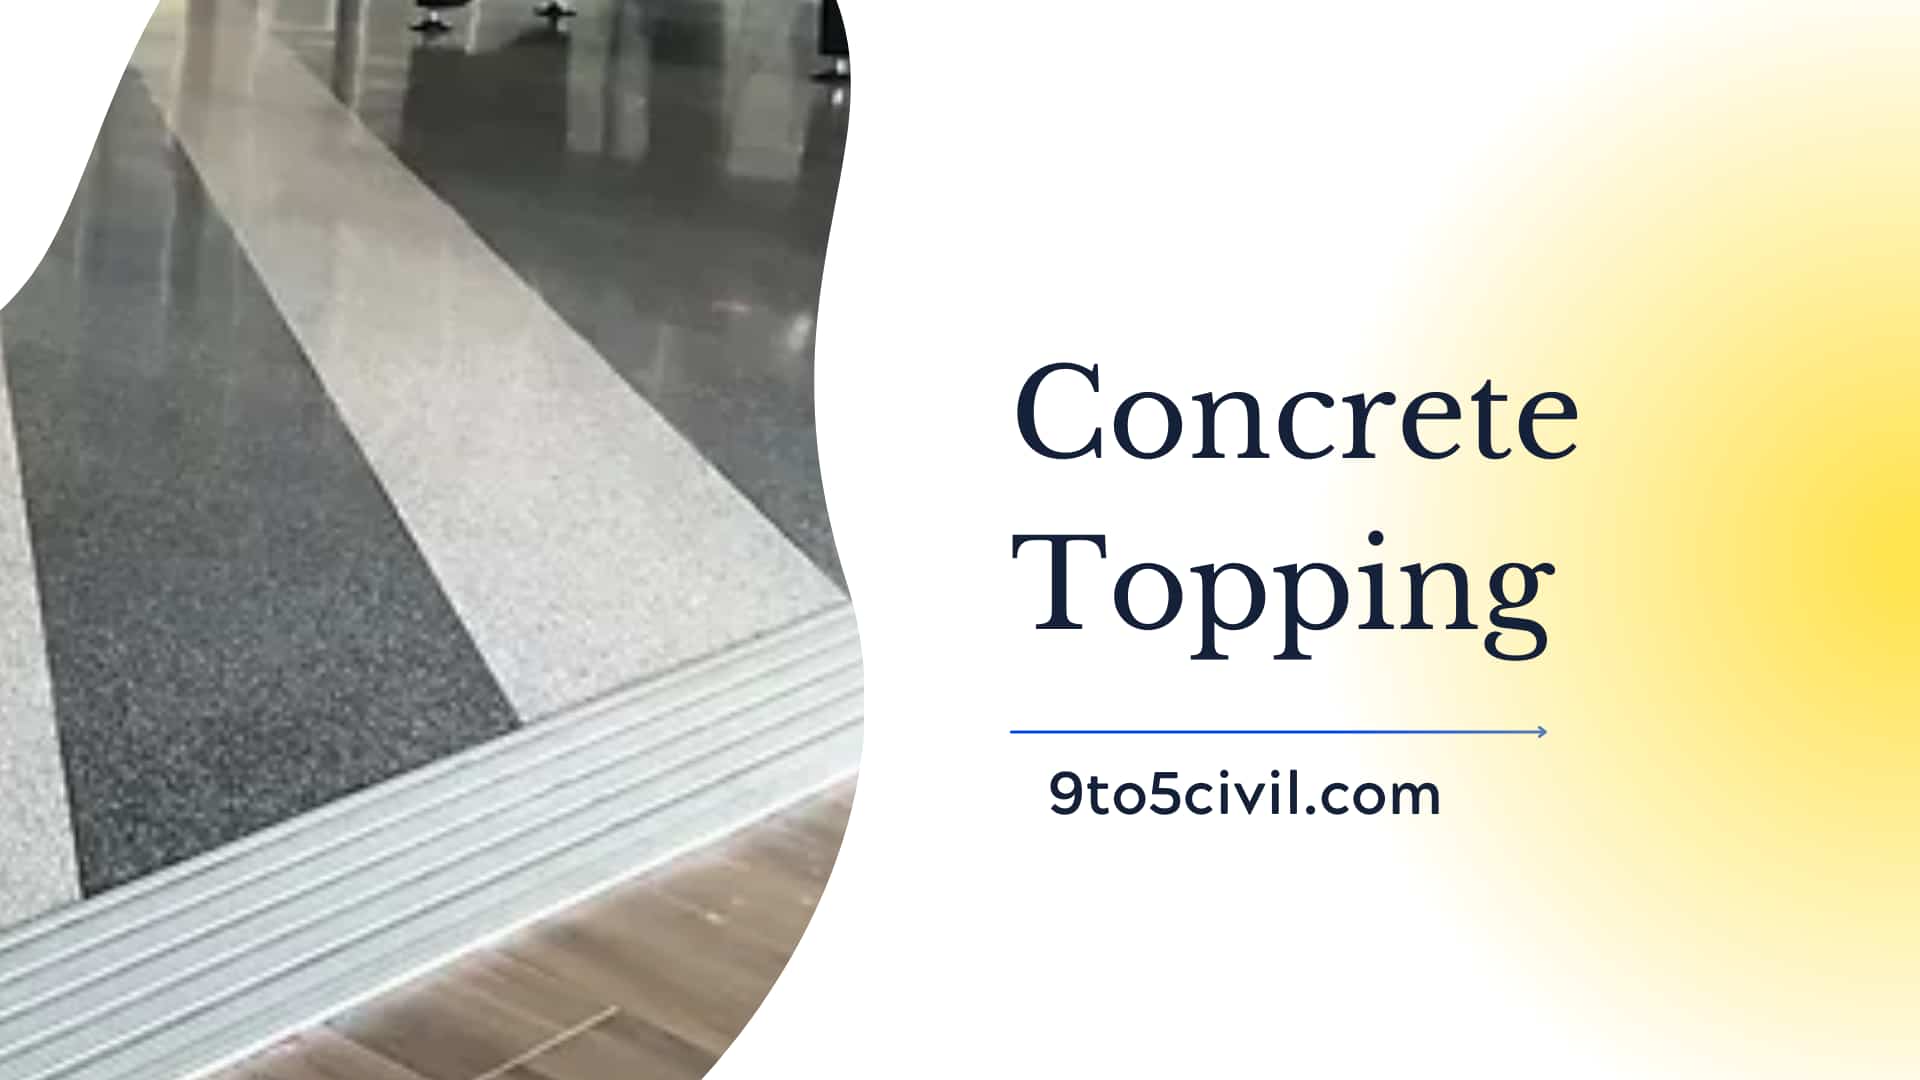 Concrete Topping